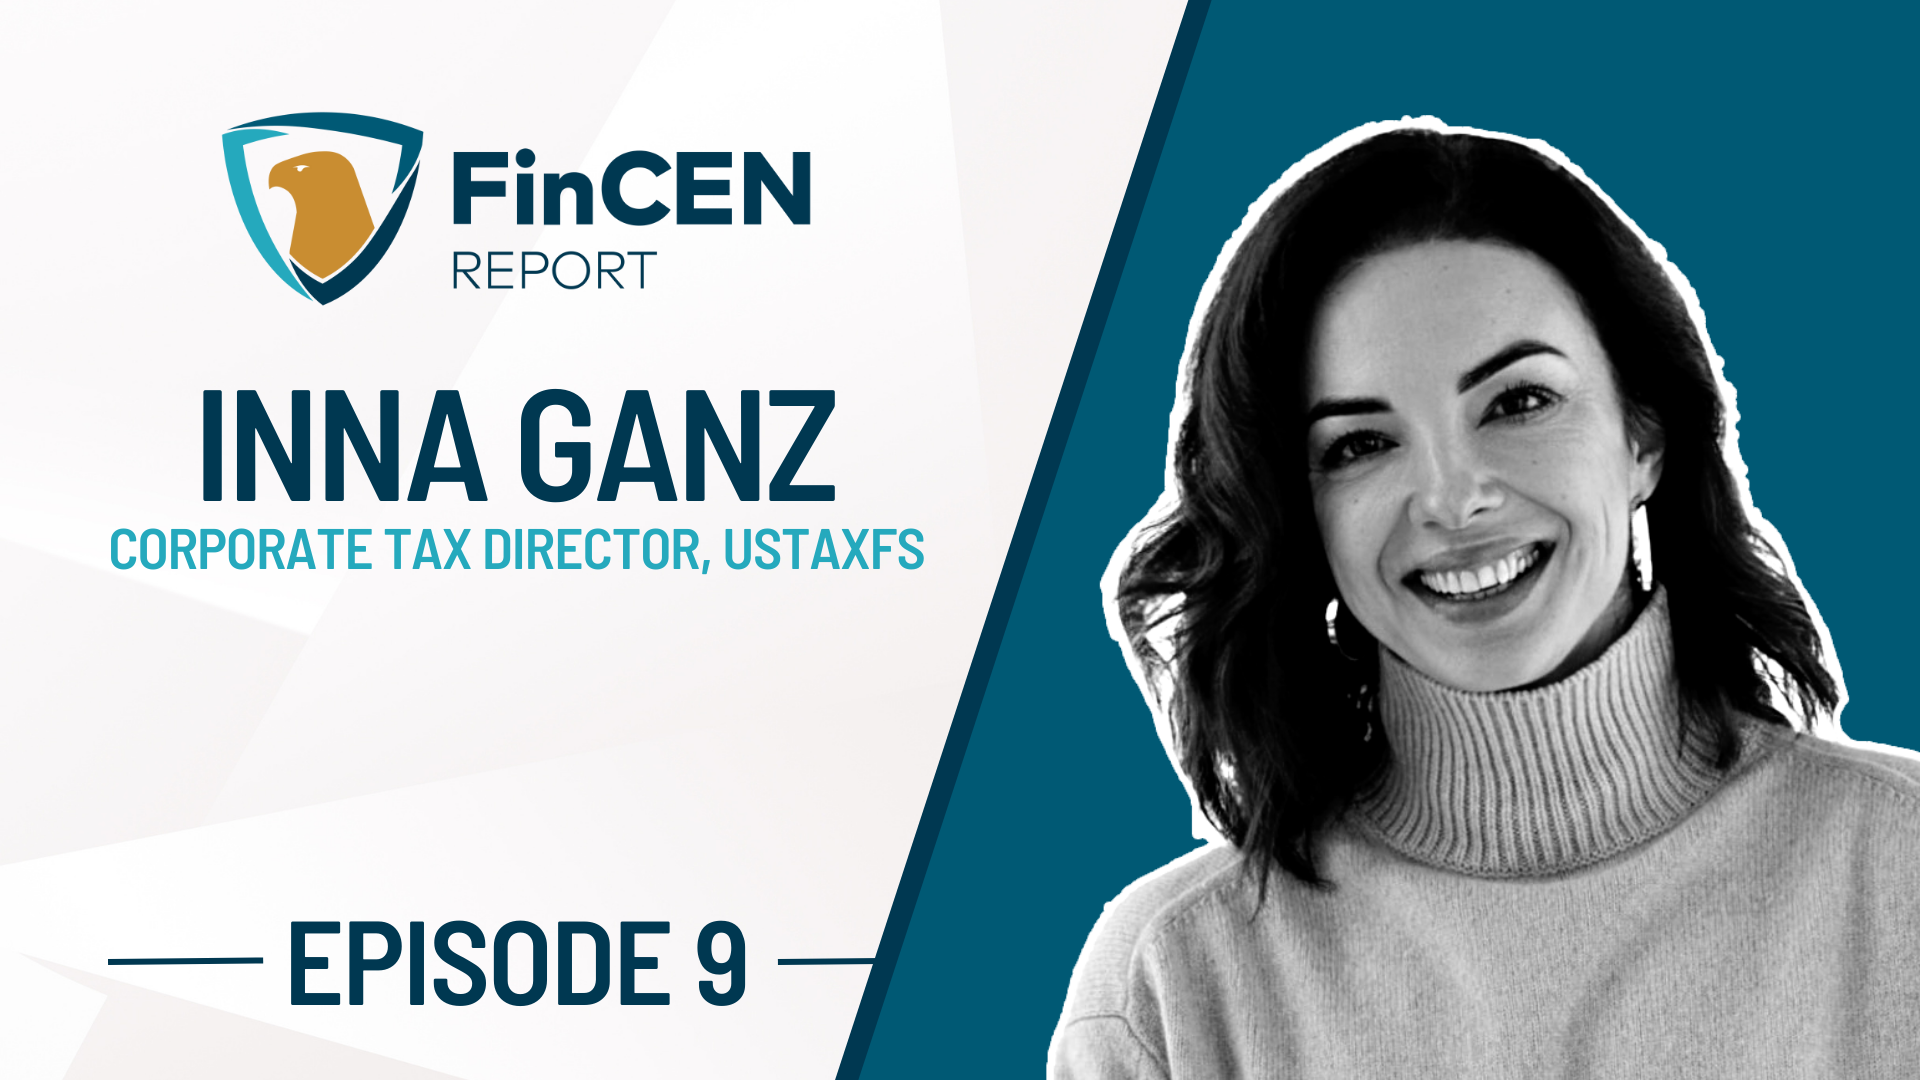 Blog cover image of Inna Ganz featured on the FinCEN REPORT podcast.